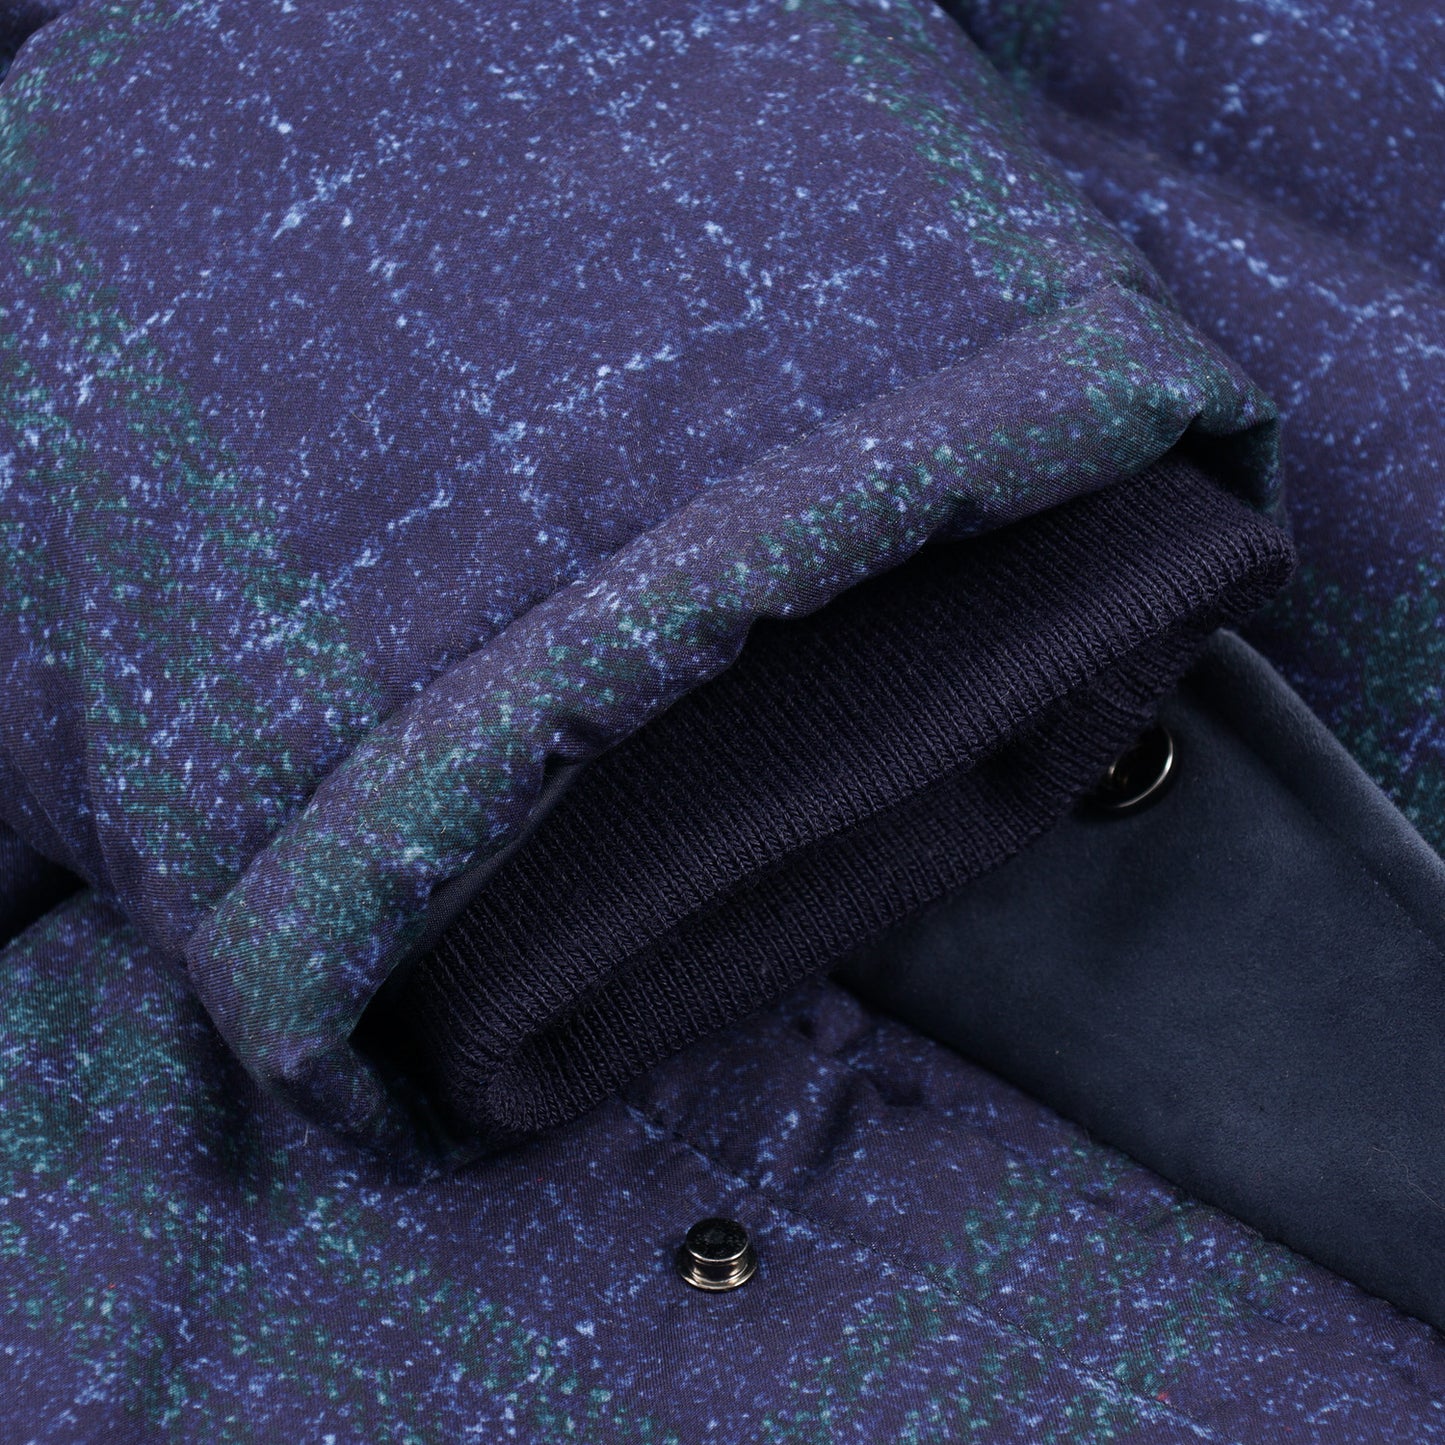 Isaia Insulated Quilted Parka - Top Shelf Apparel